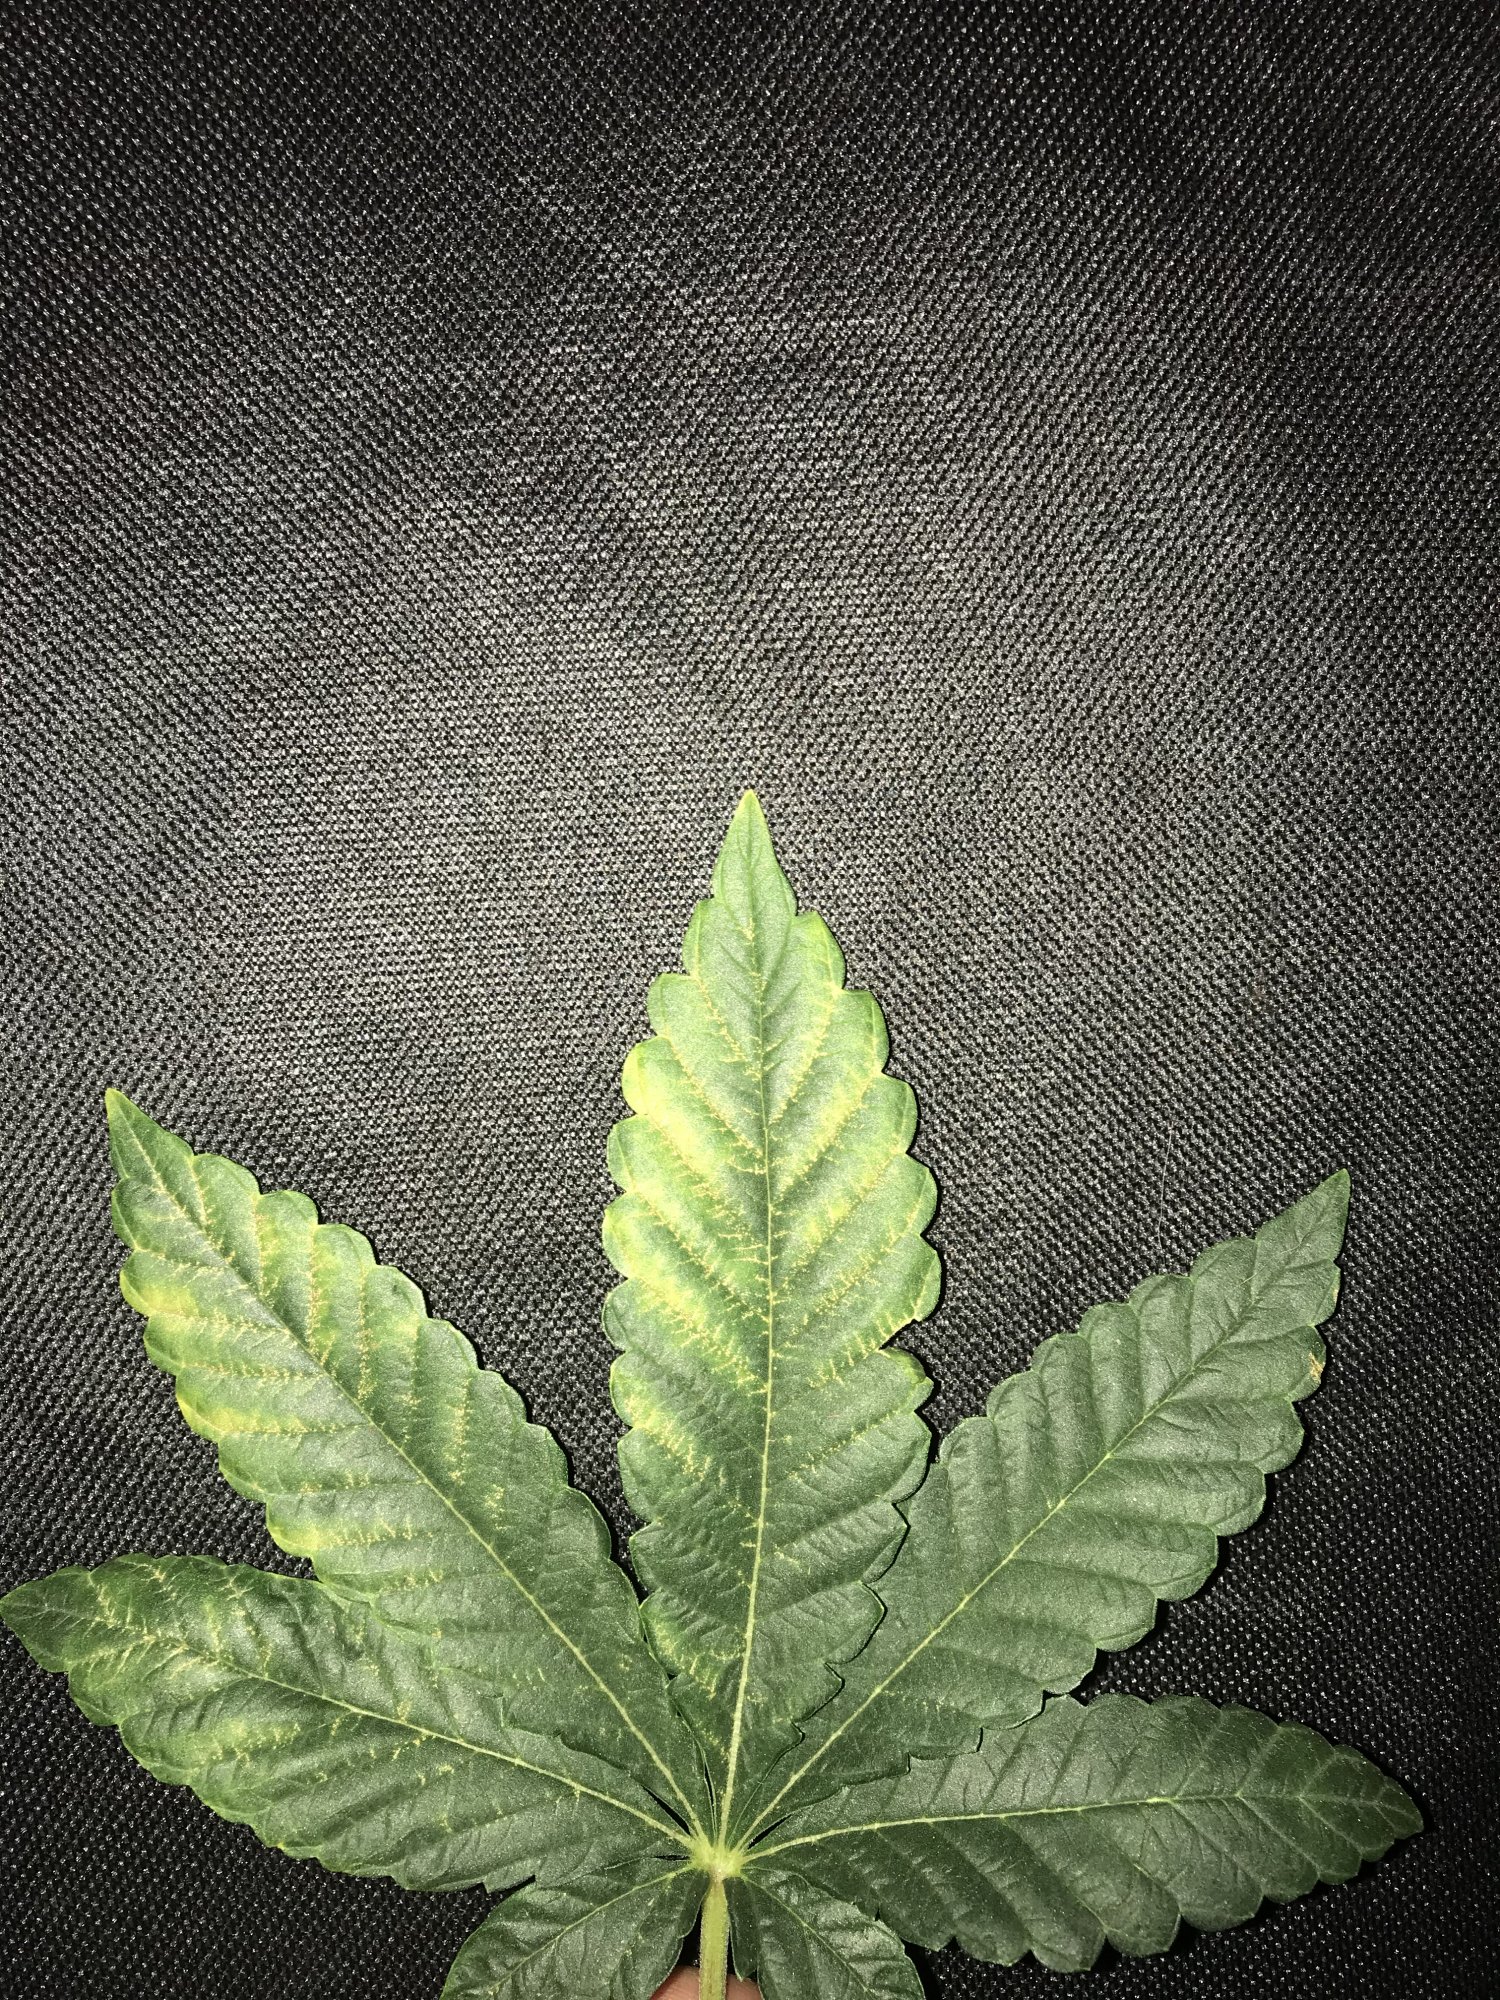 Not sure what deficiency this is